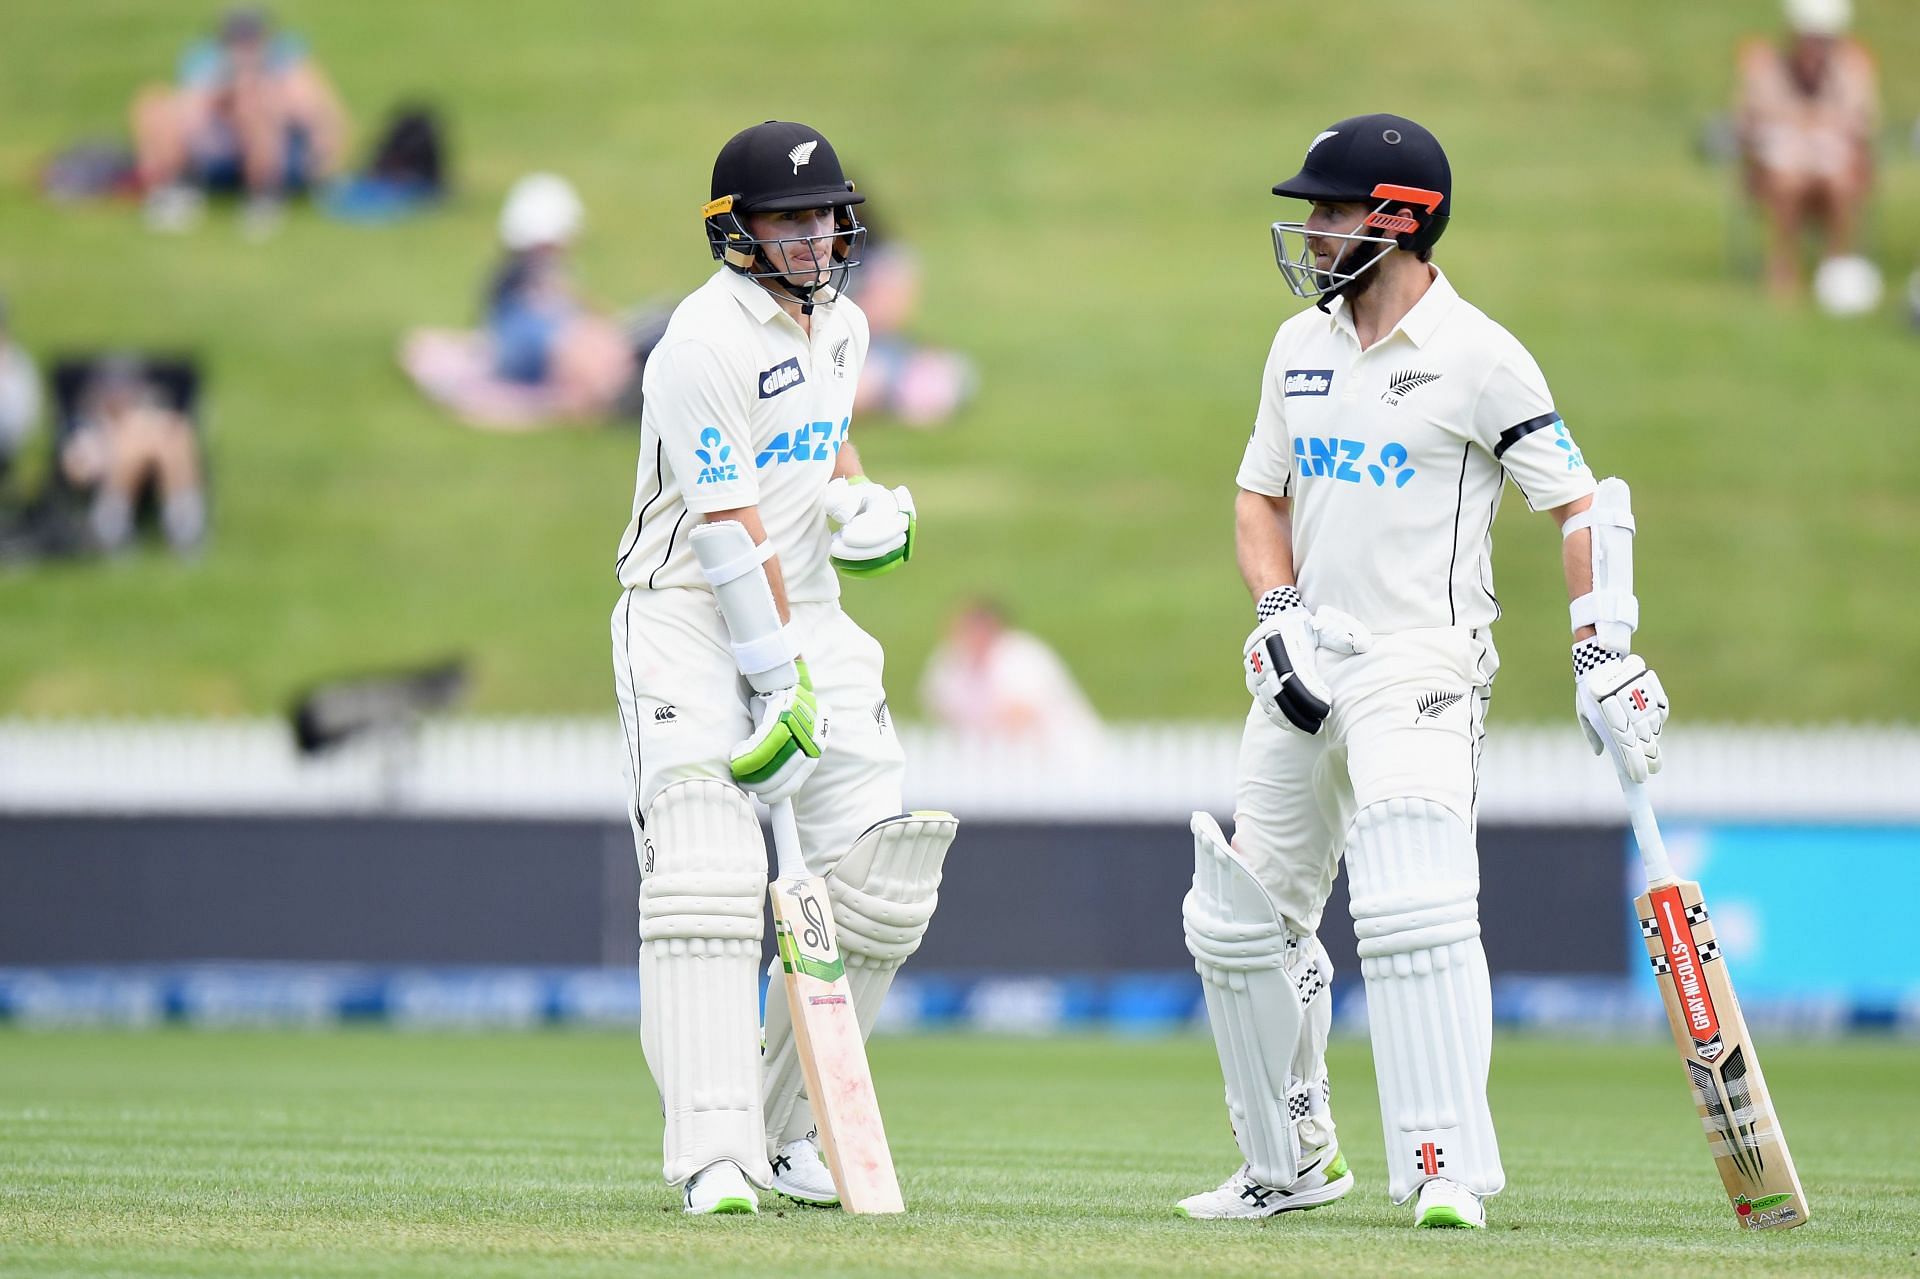 New Zealand v West Indies - 1st Test: Day 1